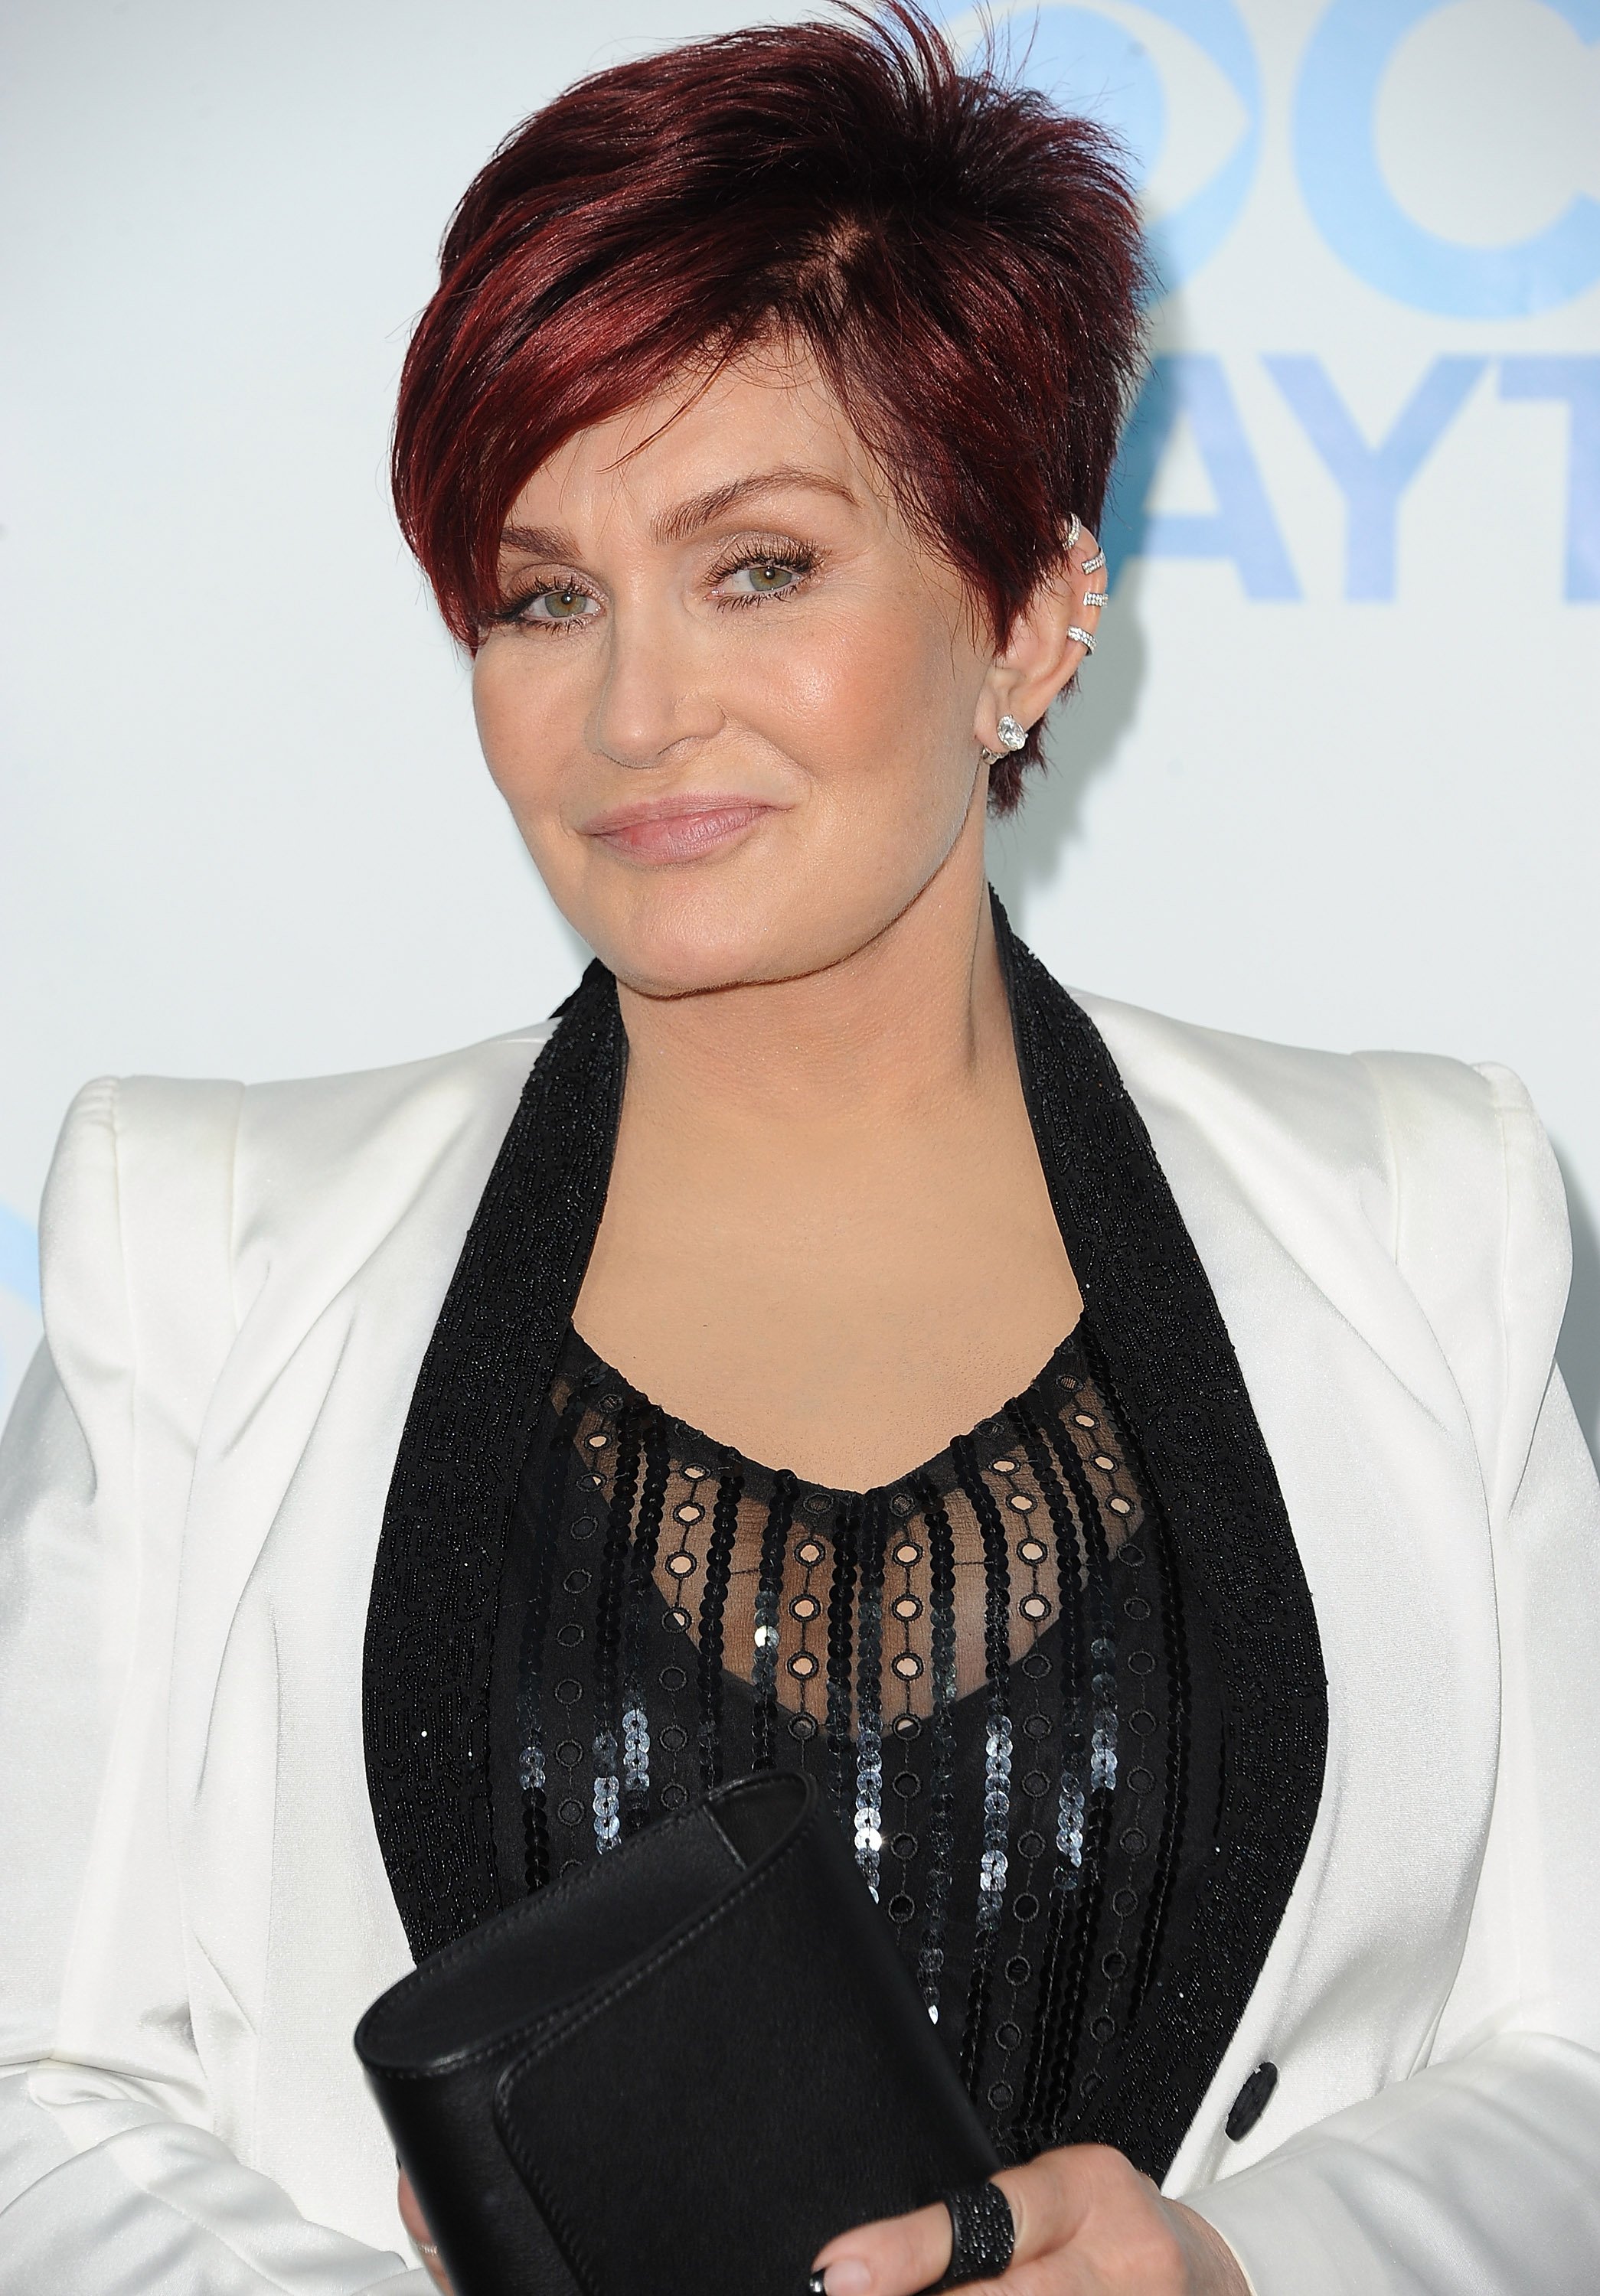 Sharon Osbourne attends the 41st Annual Daytime Emmy Awards CBS after party on June 22, 2014. | Photo: GettyImages